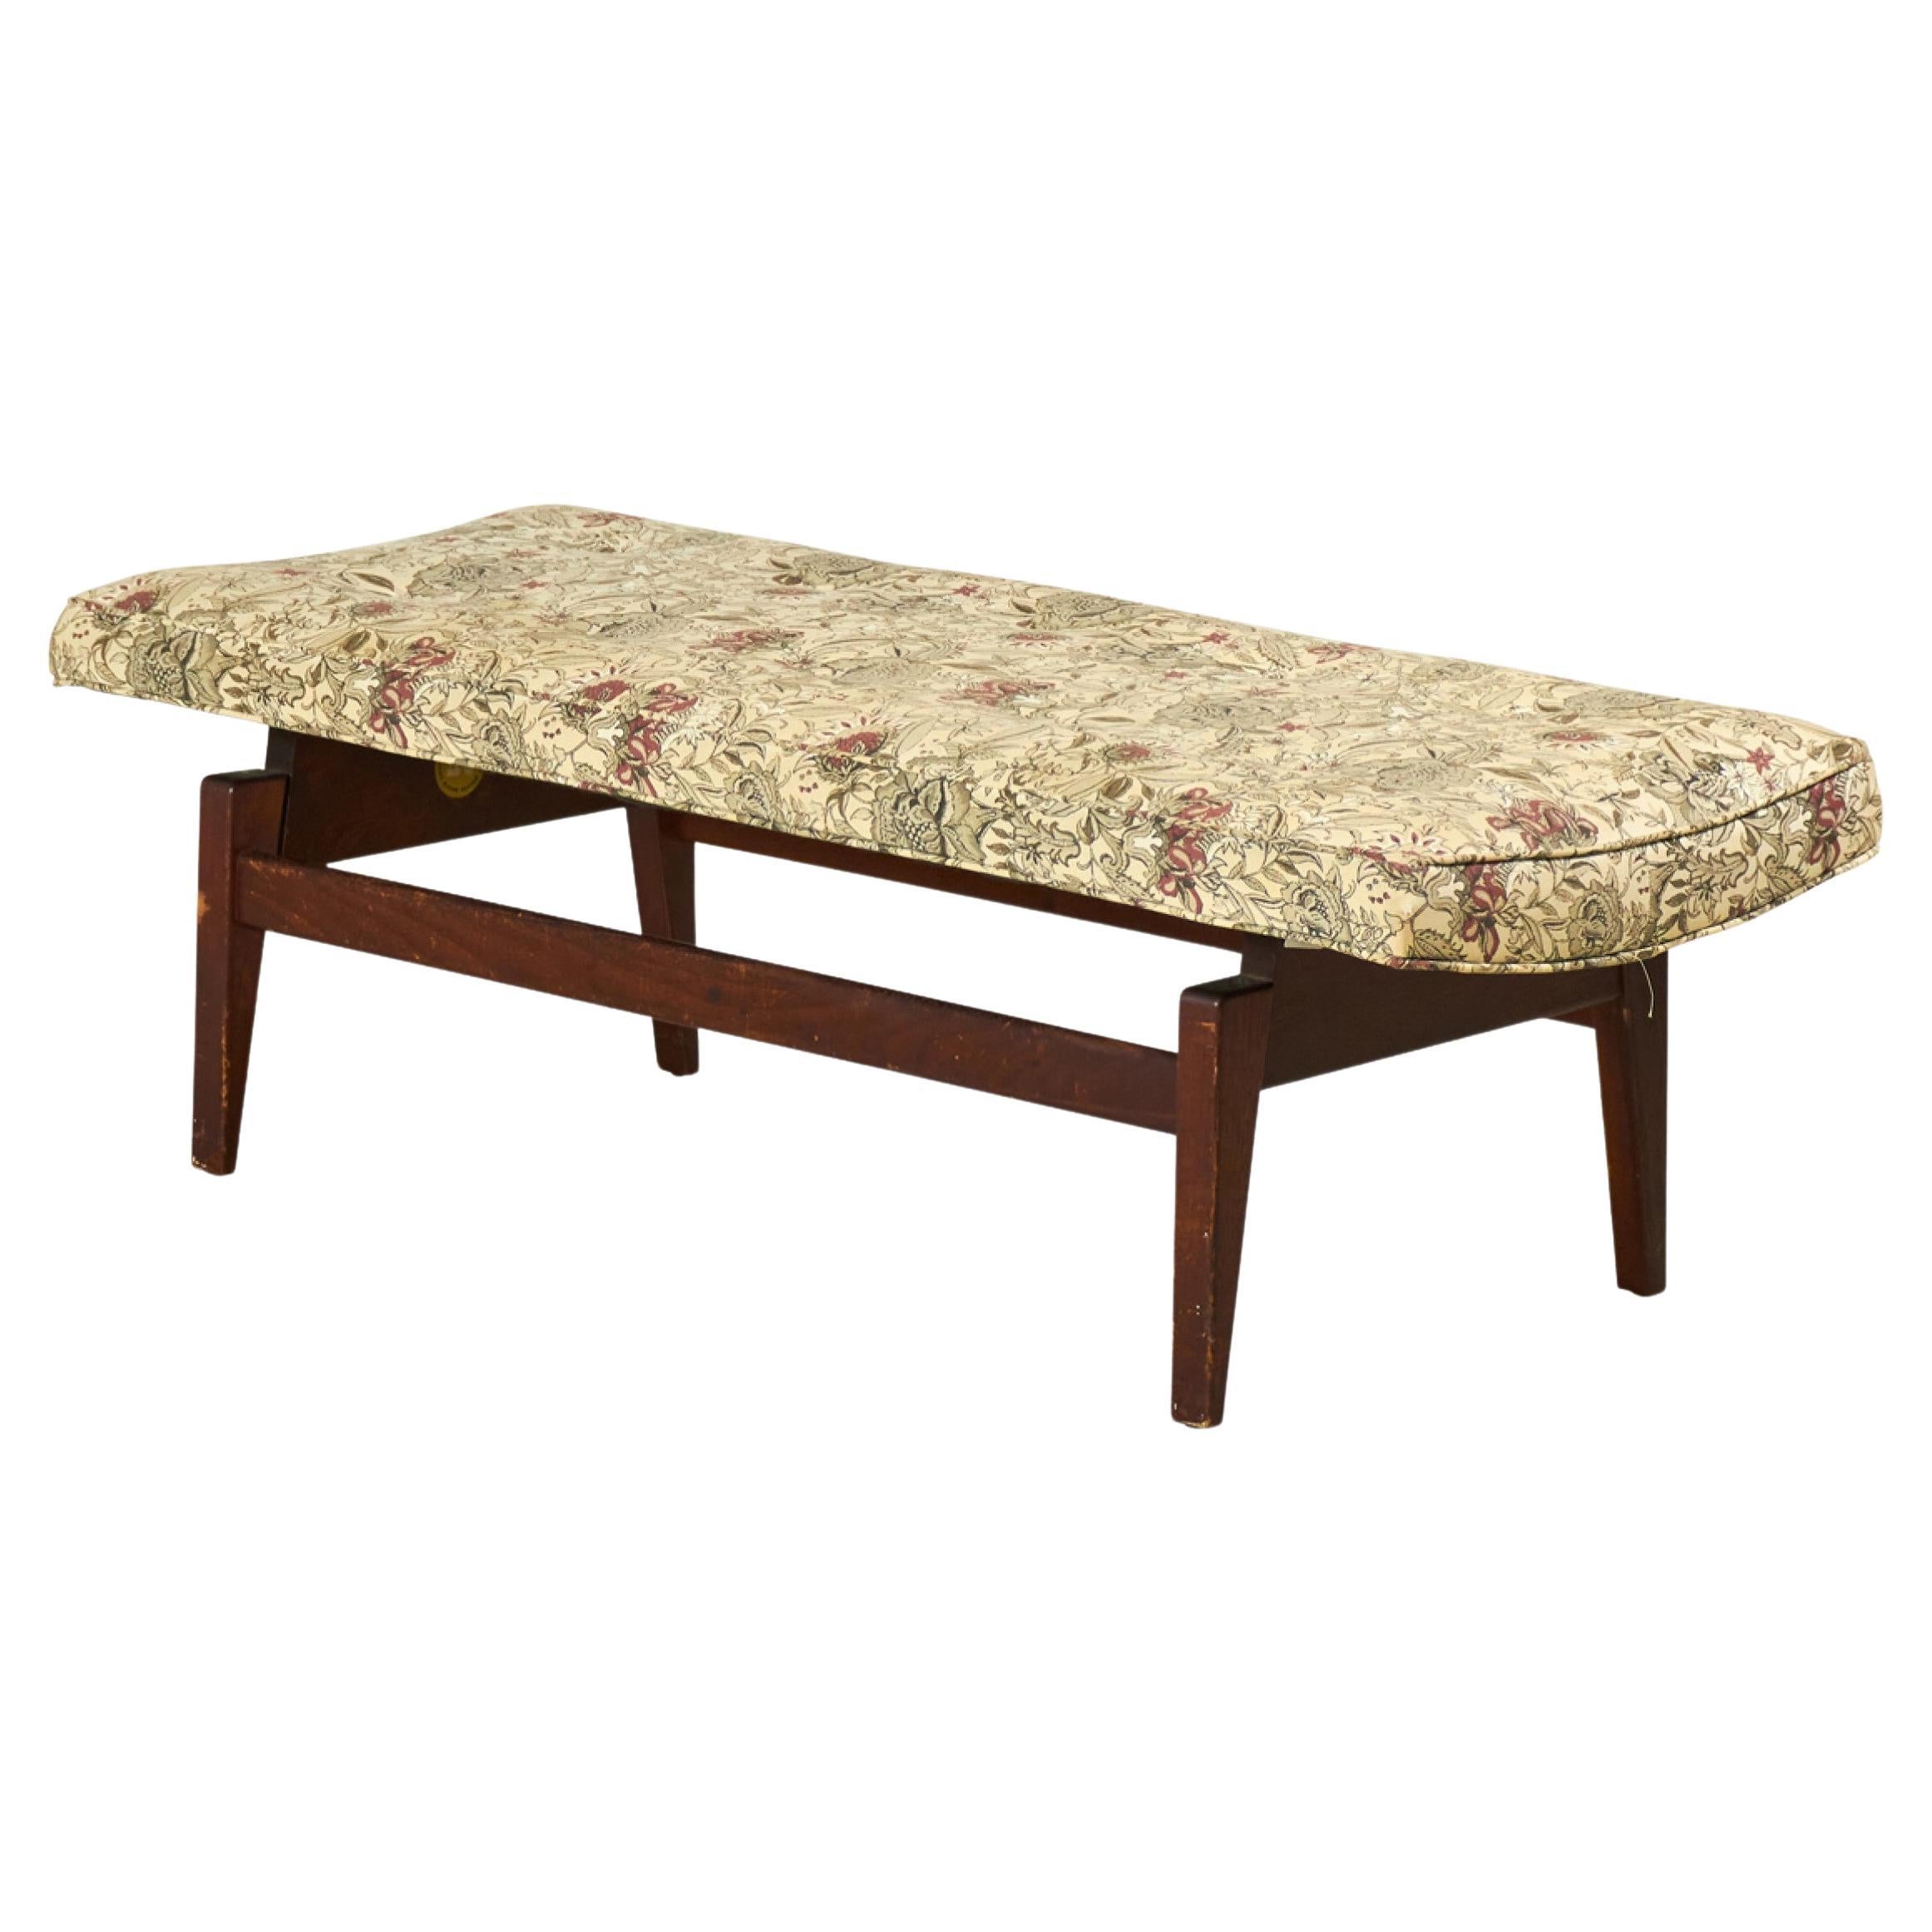 Jens Risom Danish Floating Stained Walnut and Floral Upholstered Bench For Sale